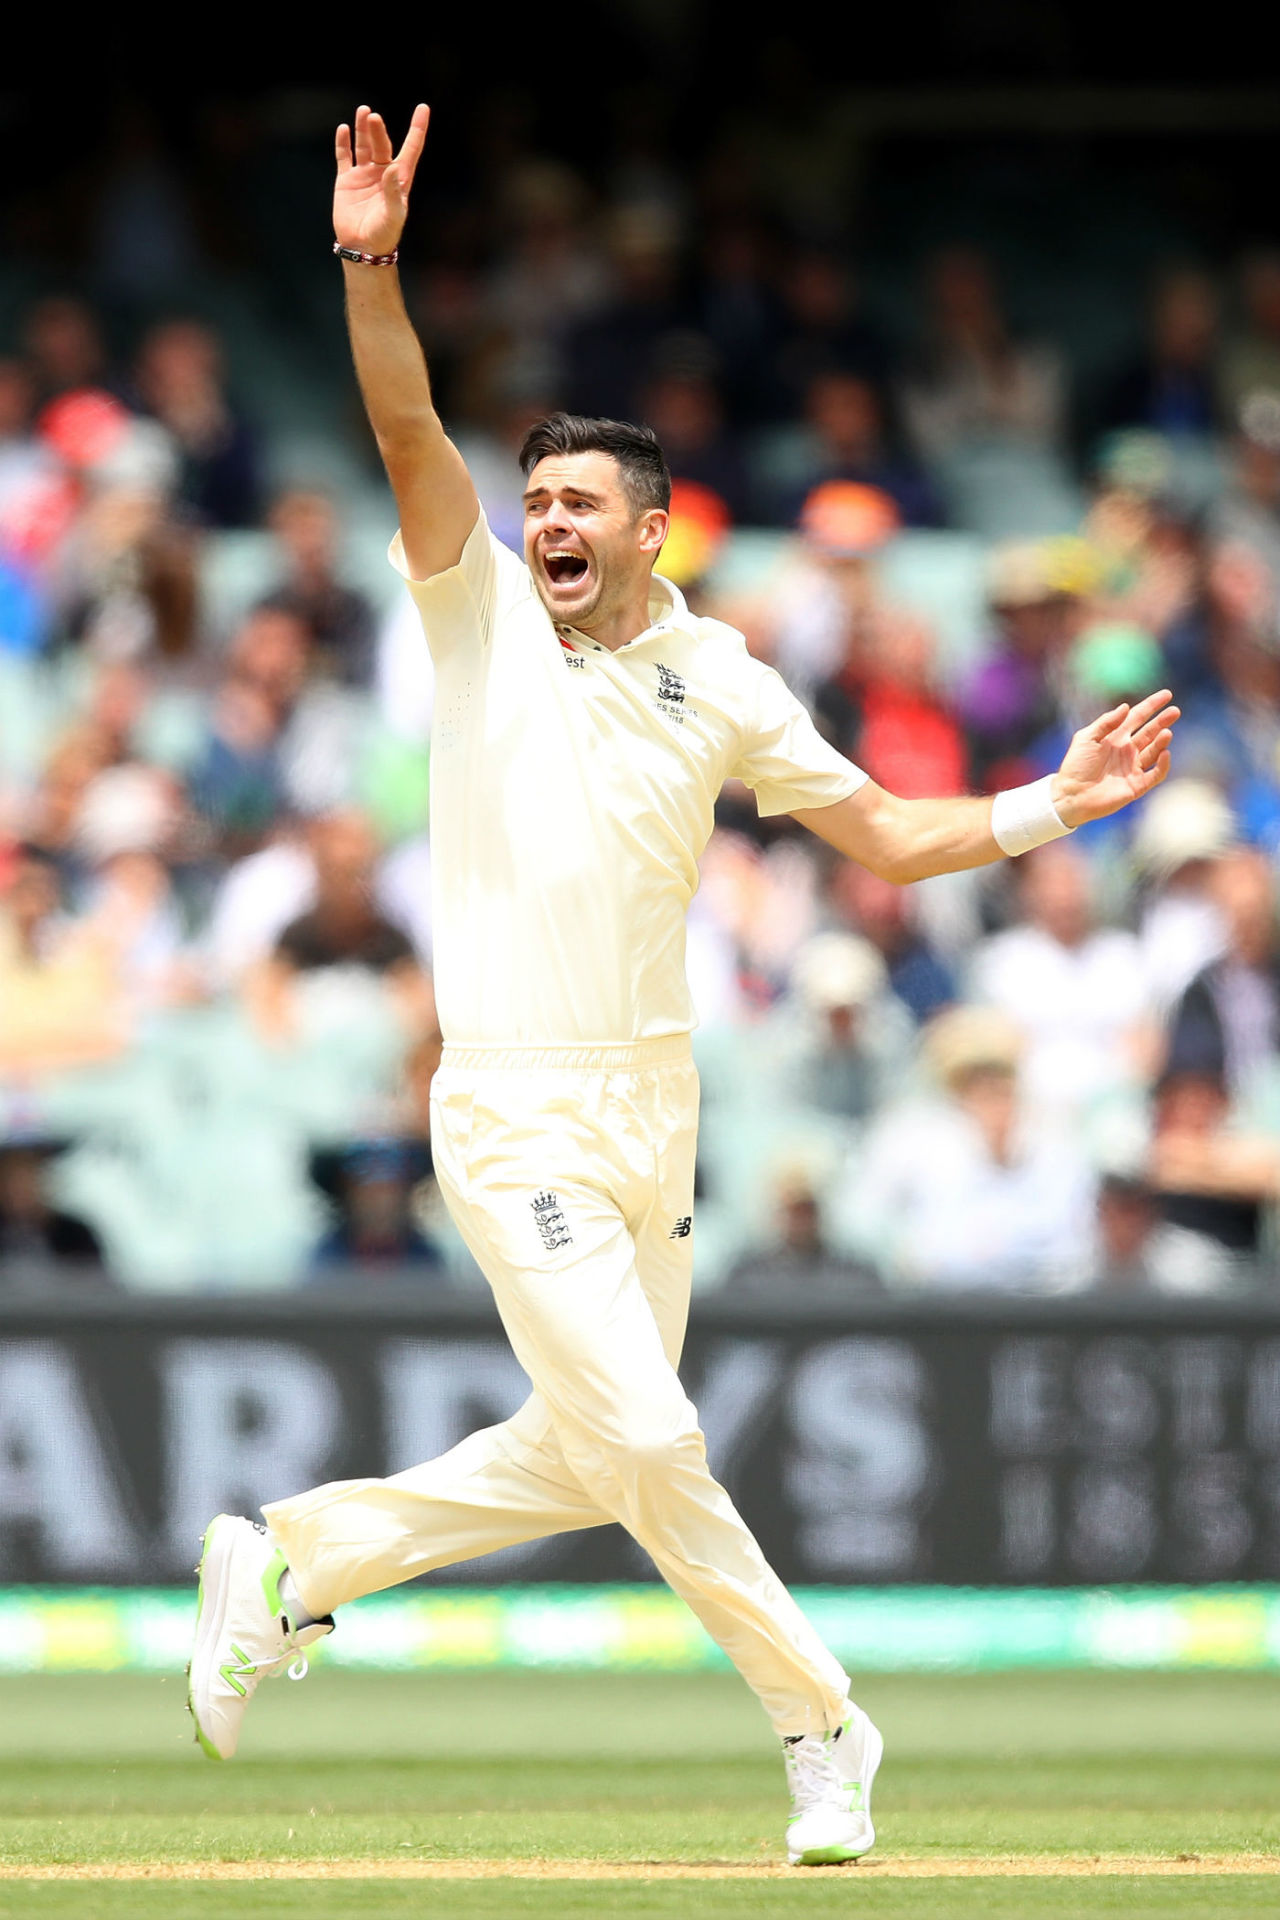 James Anderson appeals on the second day, Australia v England, 2nd Test, The Ashes 2017-18, 2nd day, Adelaide, December 3, 2017